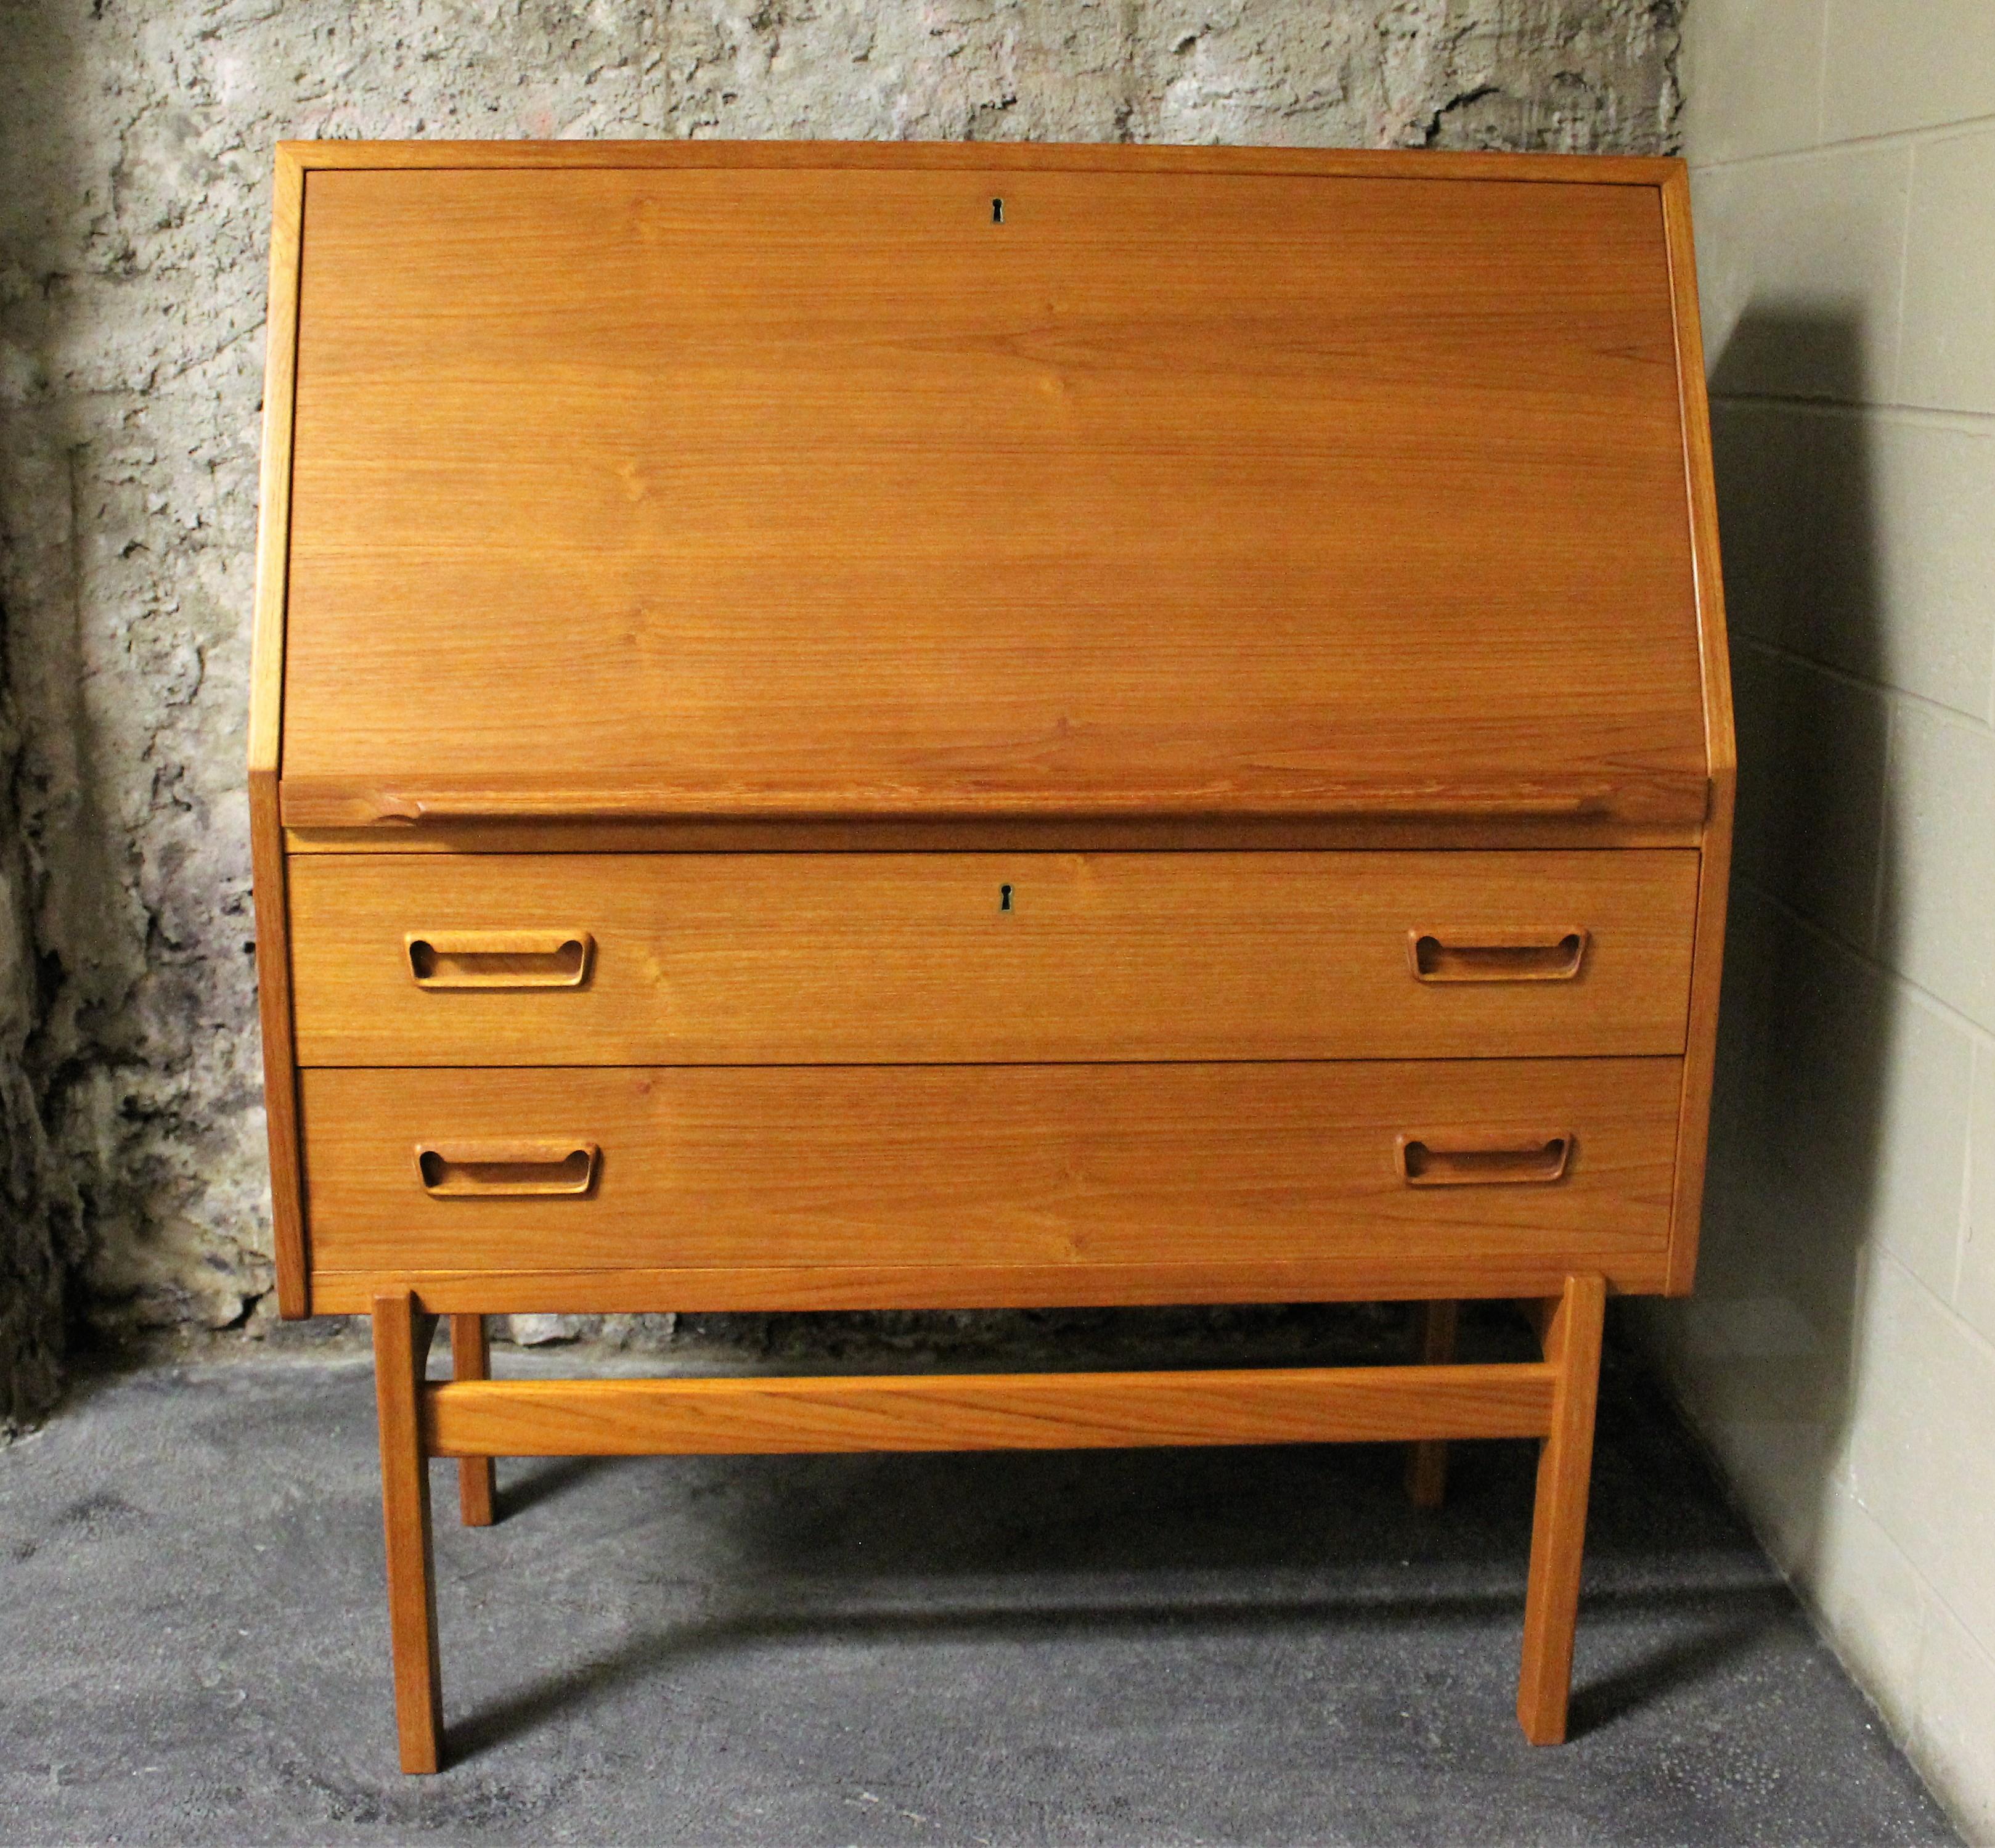 Vintage Danish design cabinet desk designed by Arne Wahl Iversen for Vinde Møbelfabrik. The organic, simple yet sophisticated design breaths 1960s, Denmark. This model 68 is a compact desk is easy to place in almost any room. The pull-out desk area